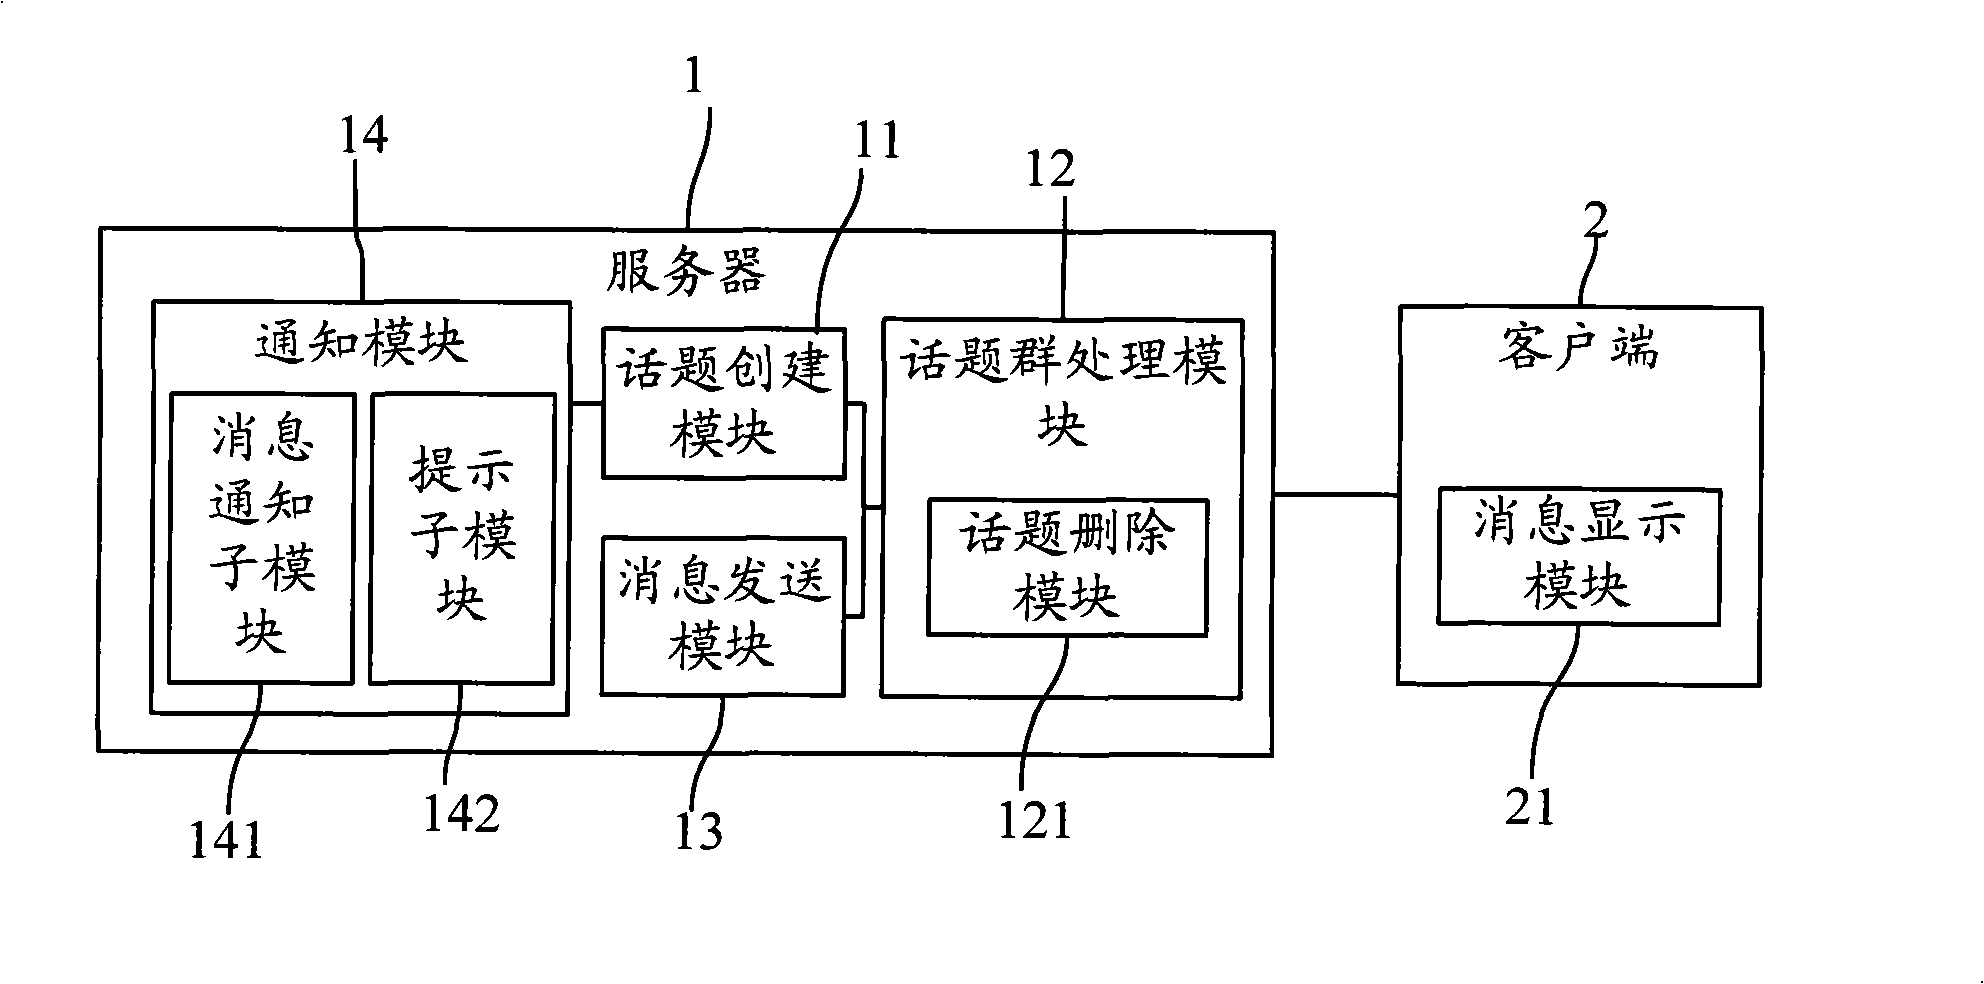 Method, system and apparatus for supporting topic classification in group